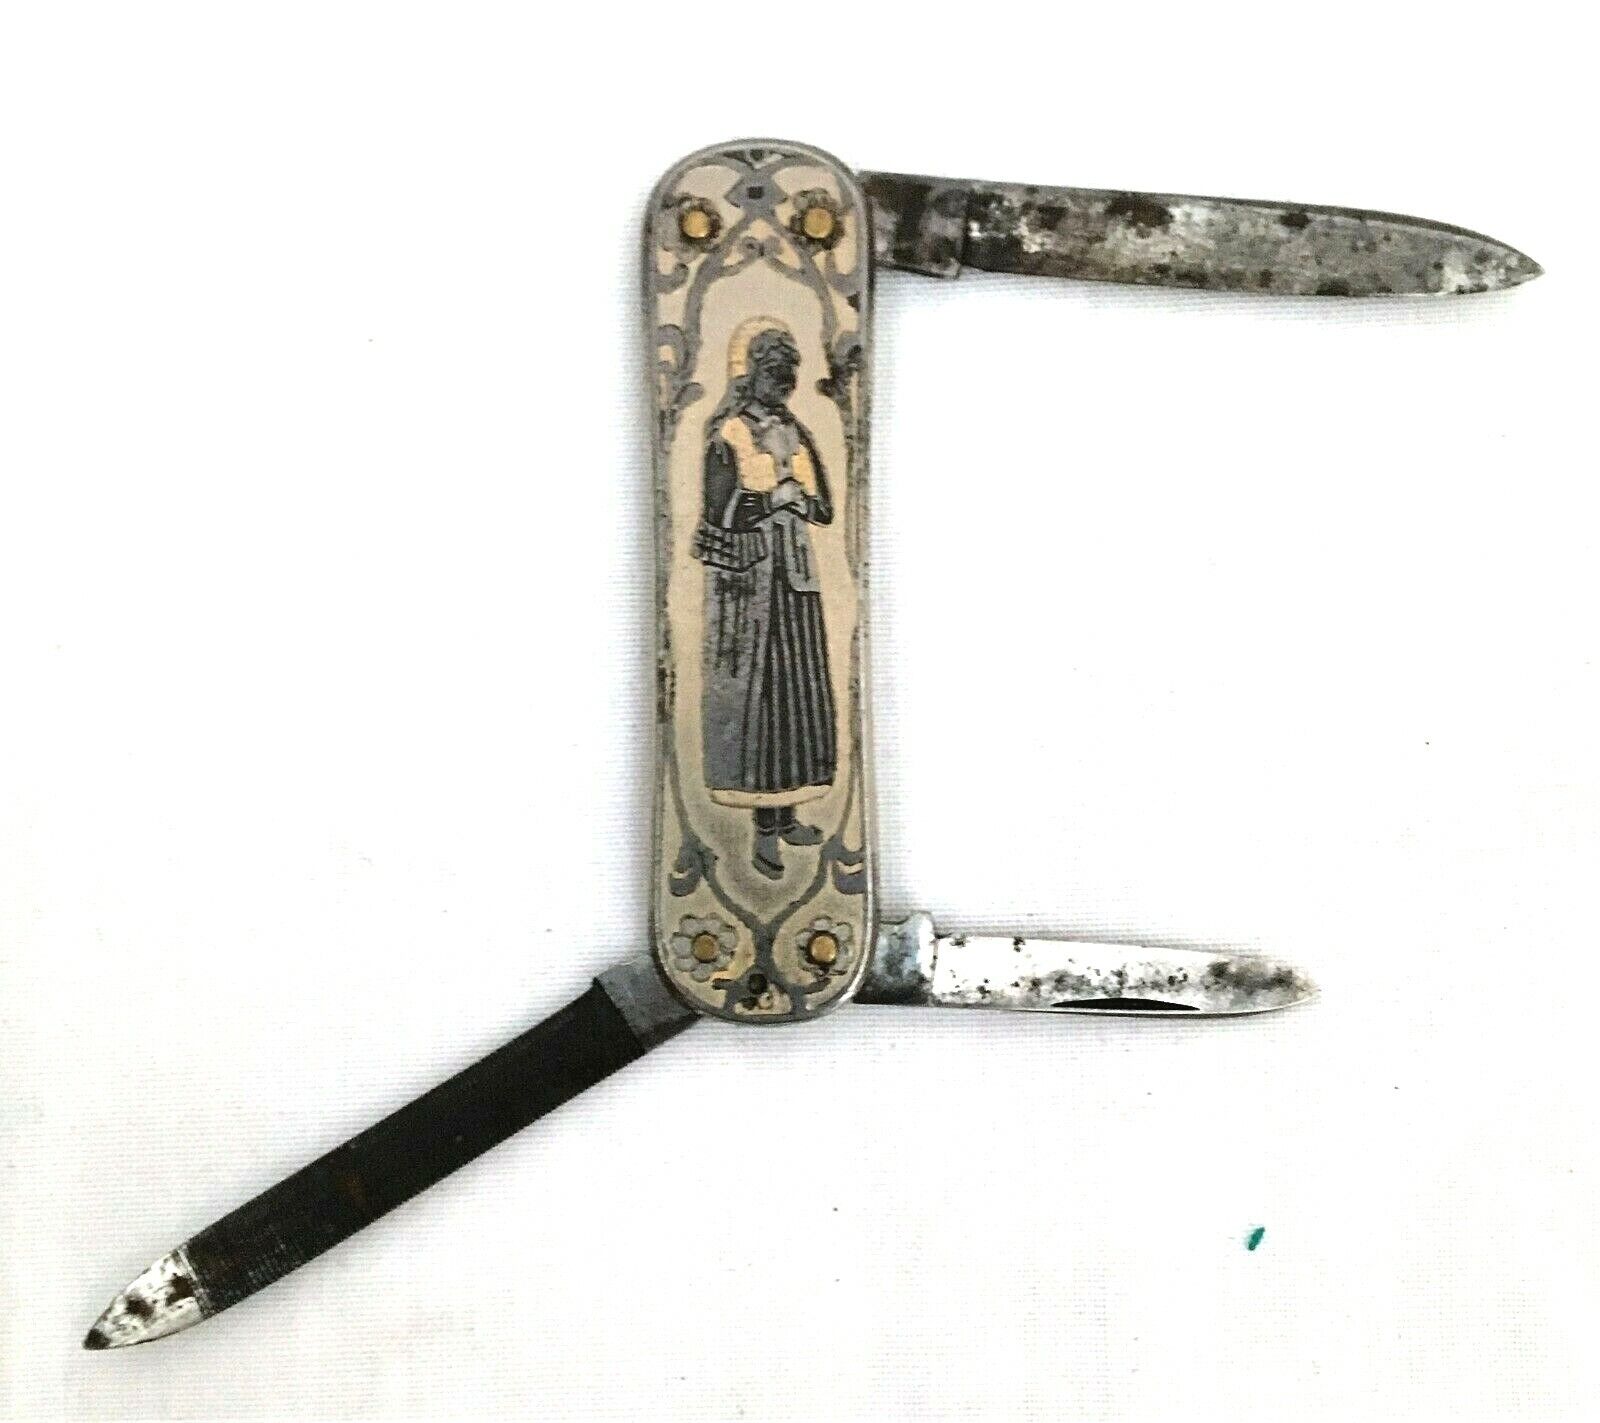 19th Century 3-Blade Pocket Knife With Nicely Engraved Handles